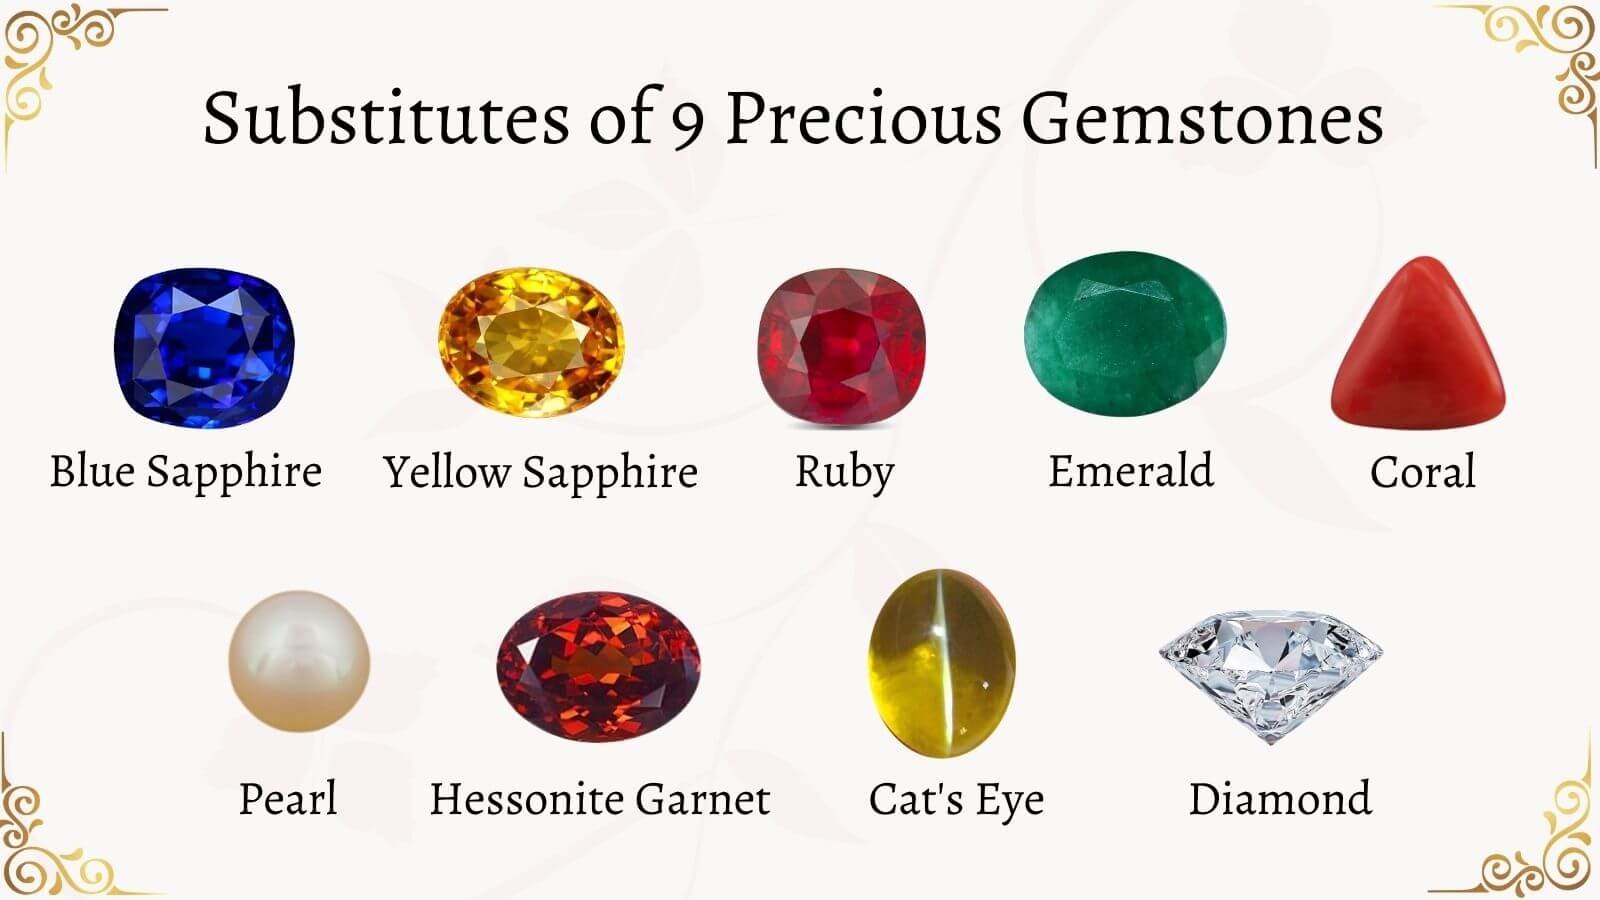 Substitutes of 9 precious gemstones: Are They Effective